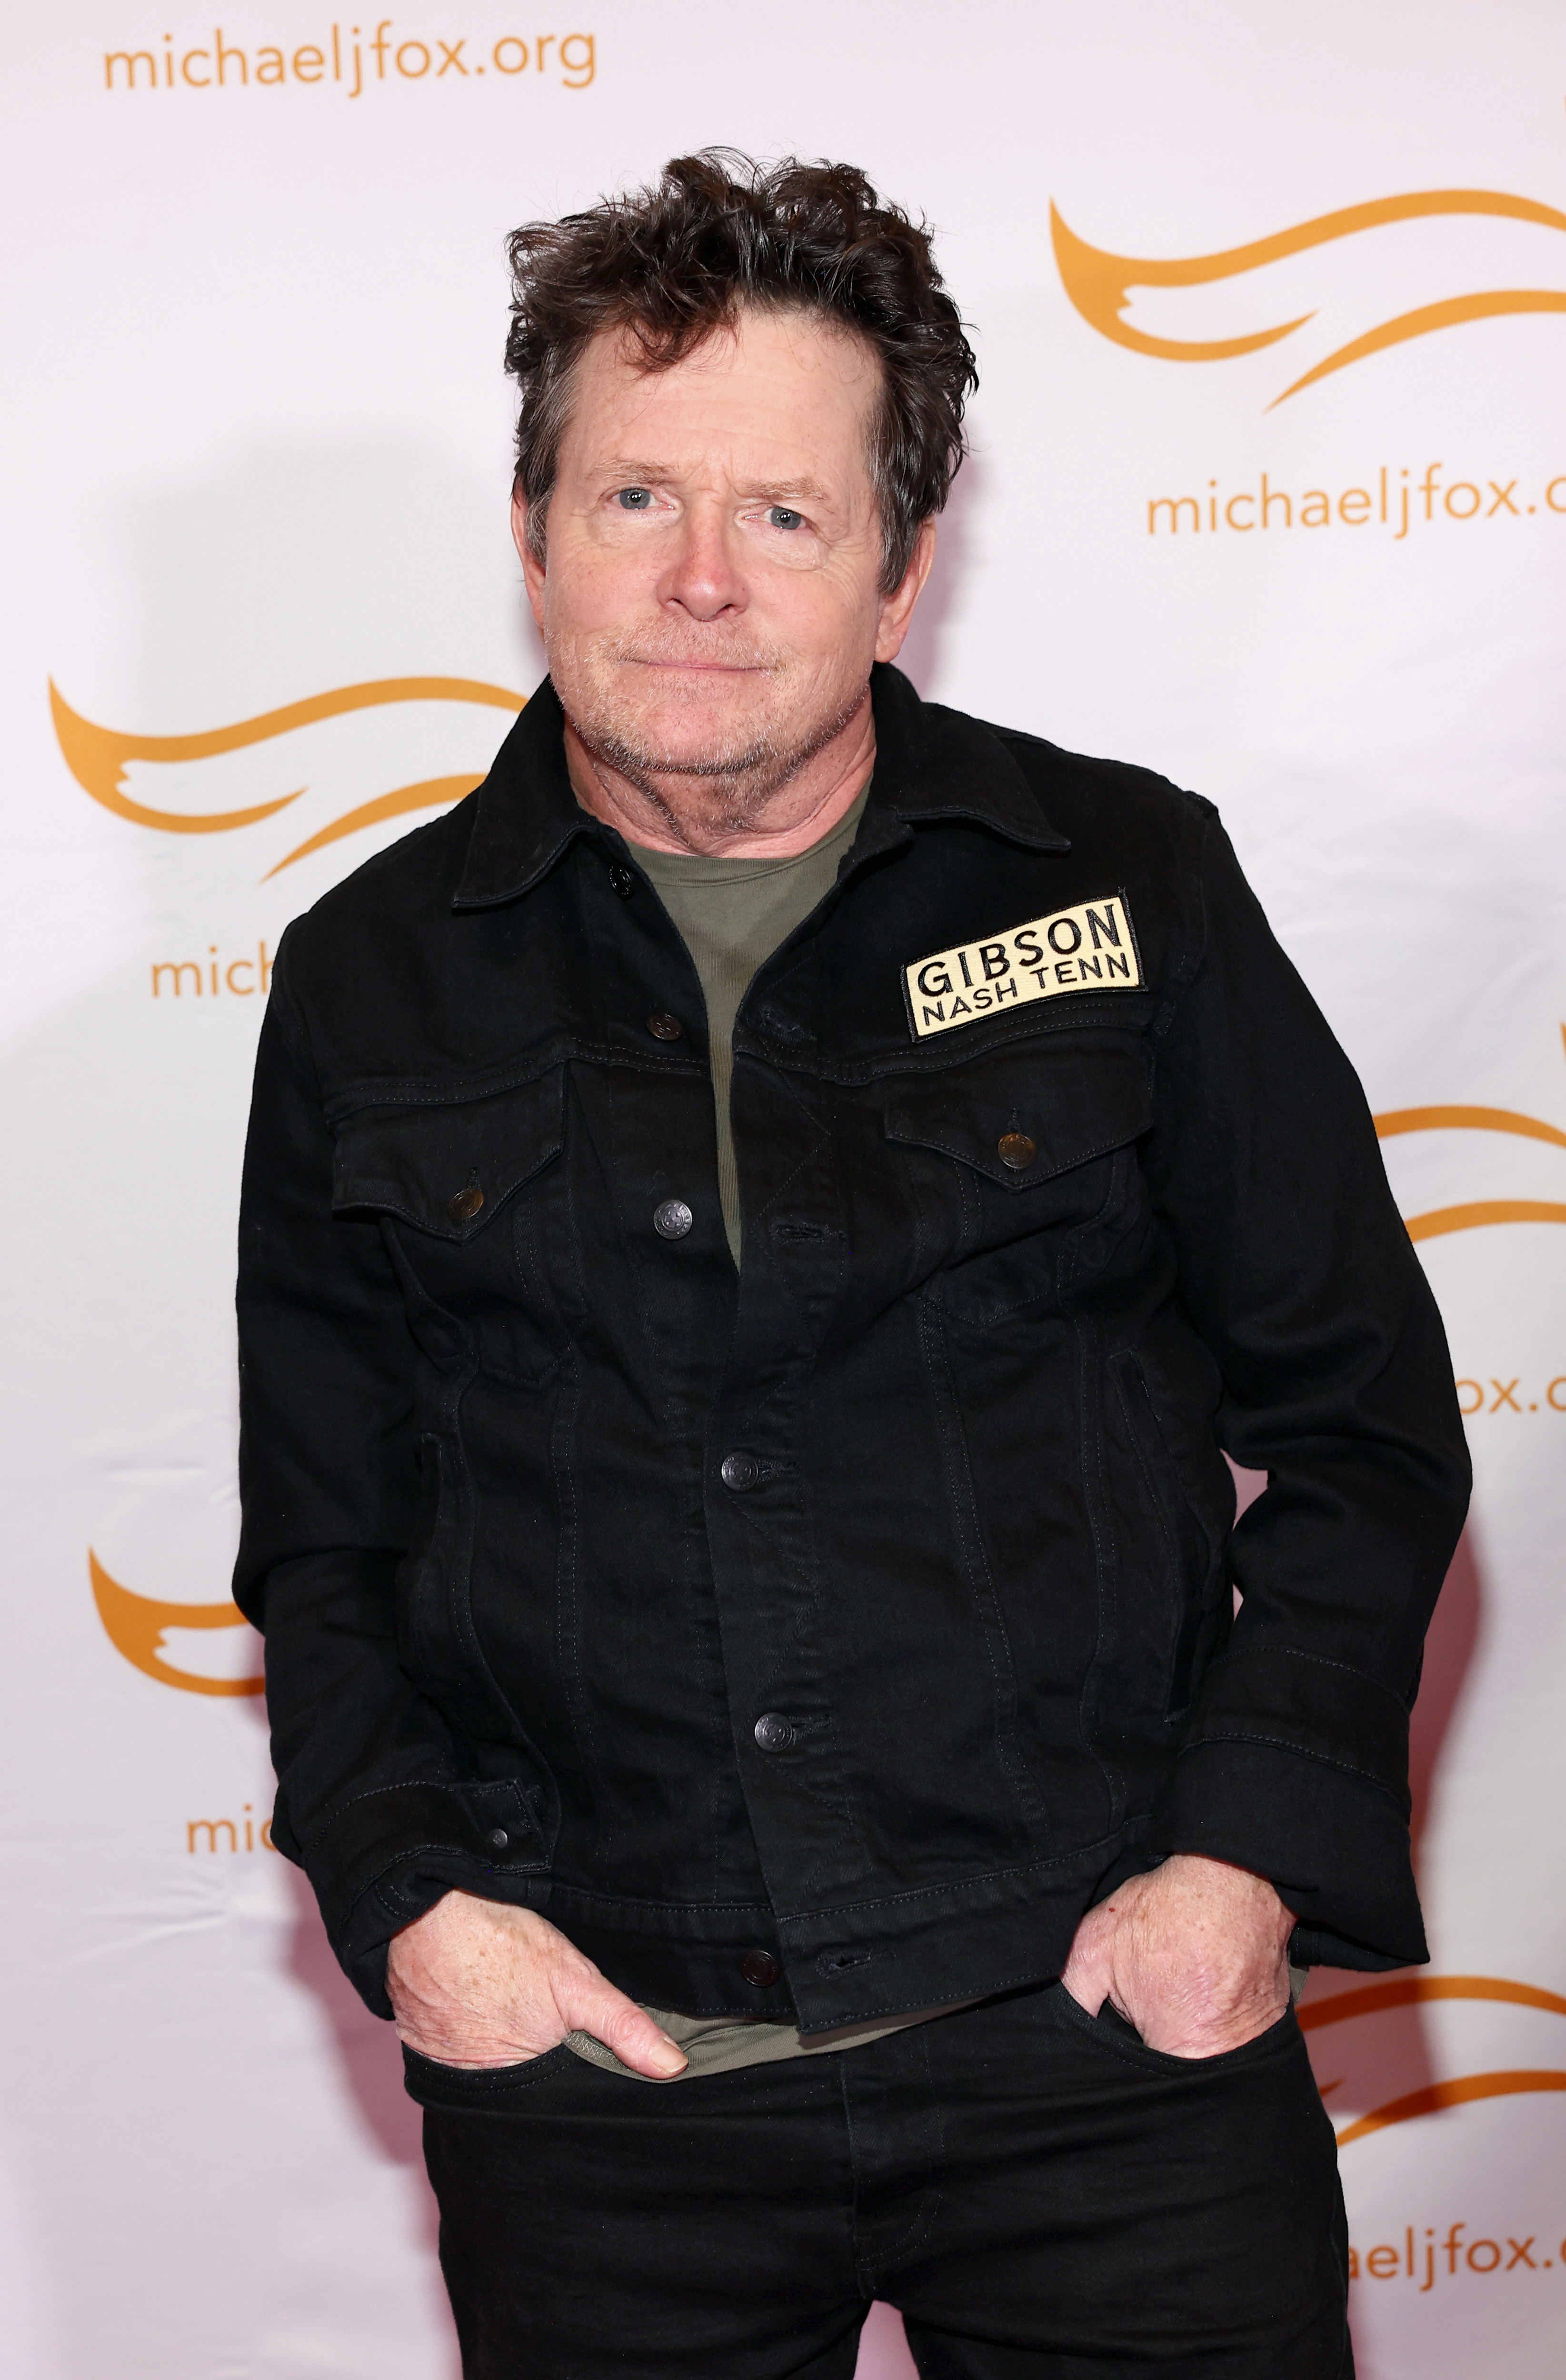 Michael J. Fox stands with hands in pockets, wearing a dark jacket with a &quot;Gibson Nash Tenn&quot; patch, in front of a backdrop with &quot;michaeljfox.org&quot; logos